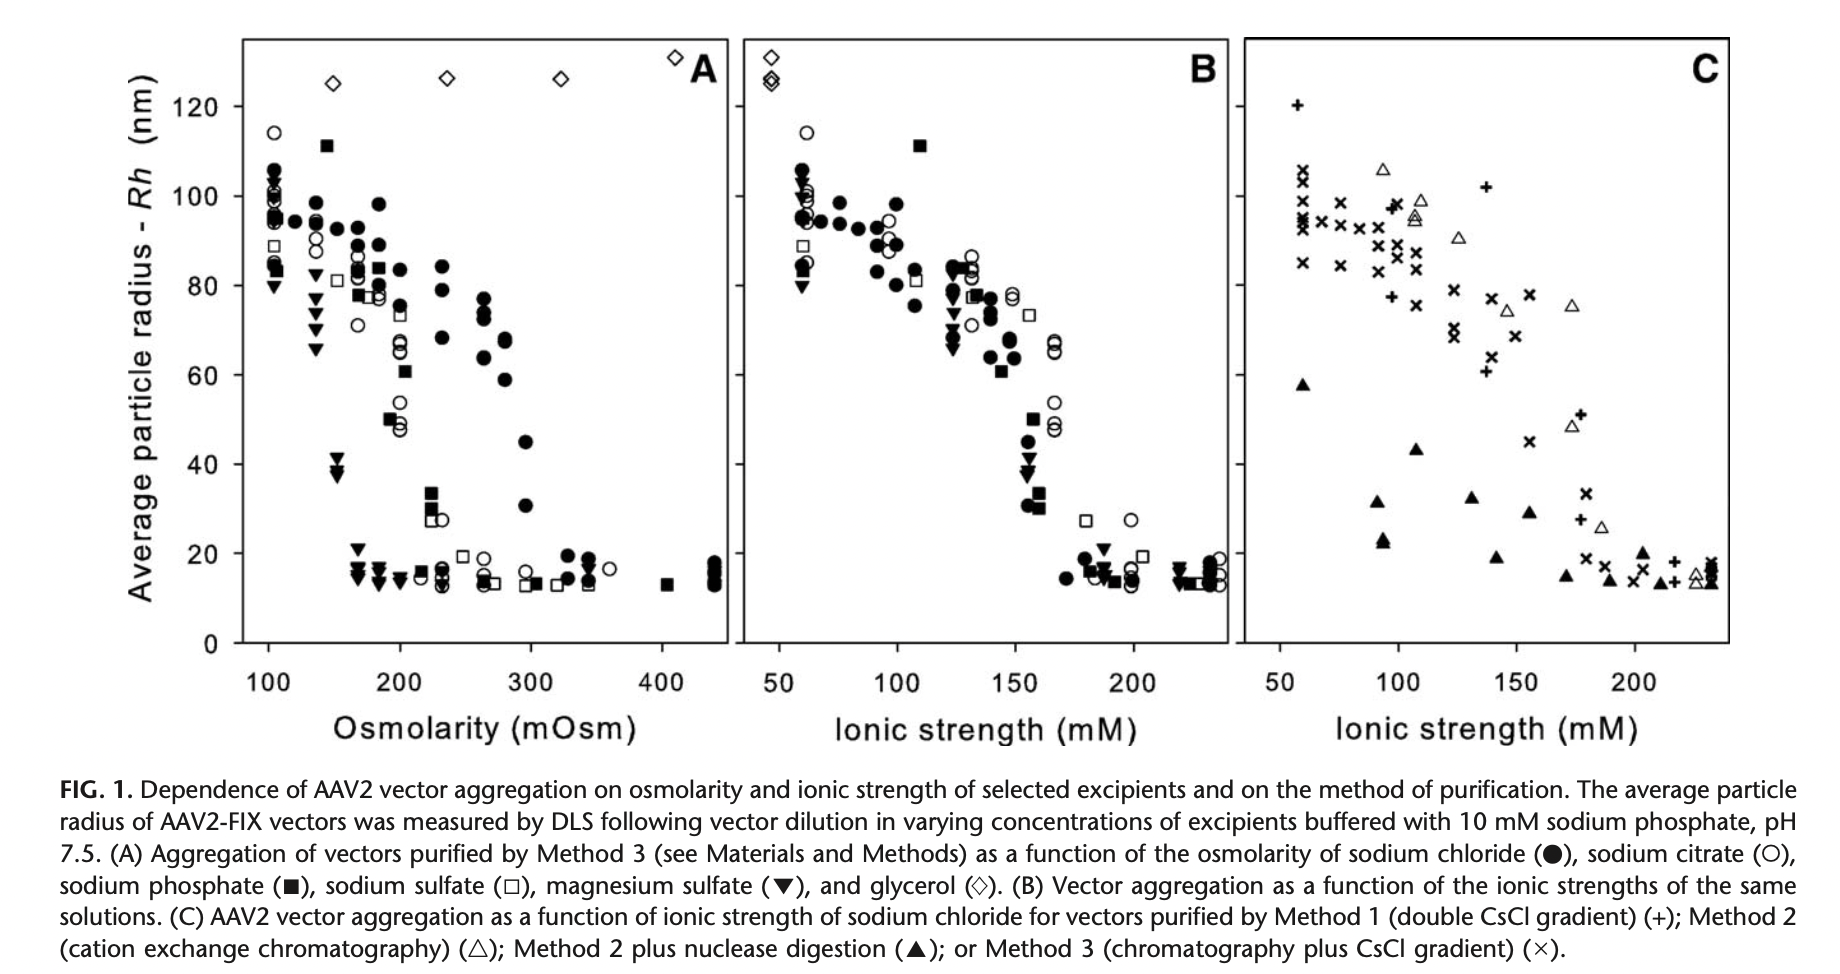 Effect of ionic strength on the aggregation of capsids measured by DLS